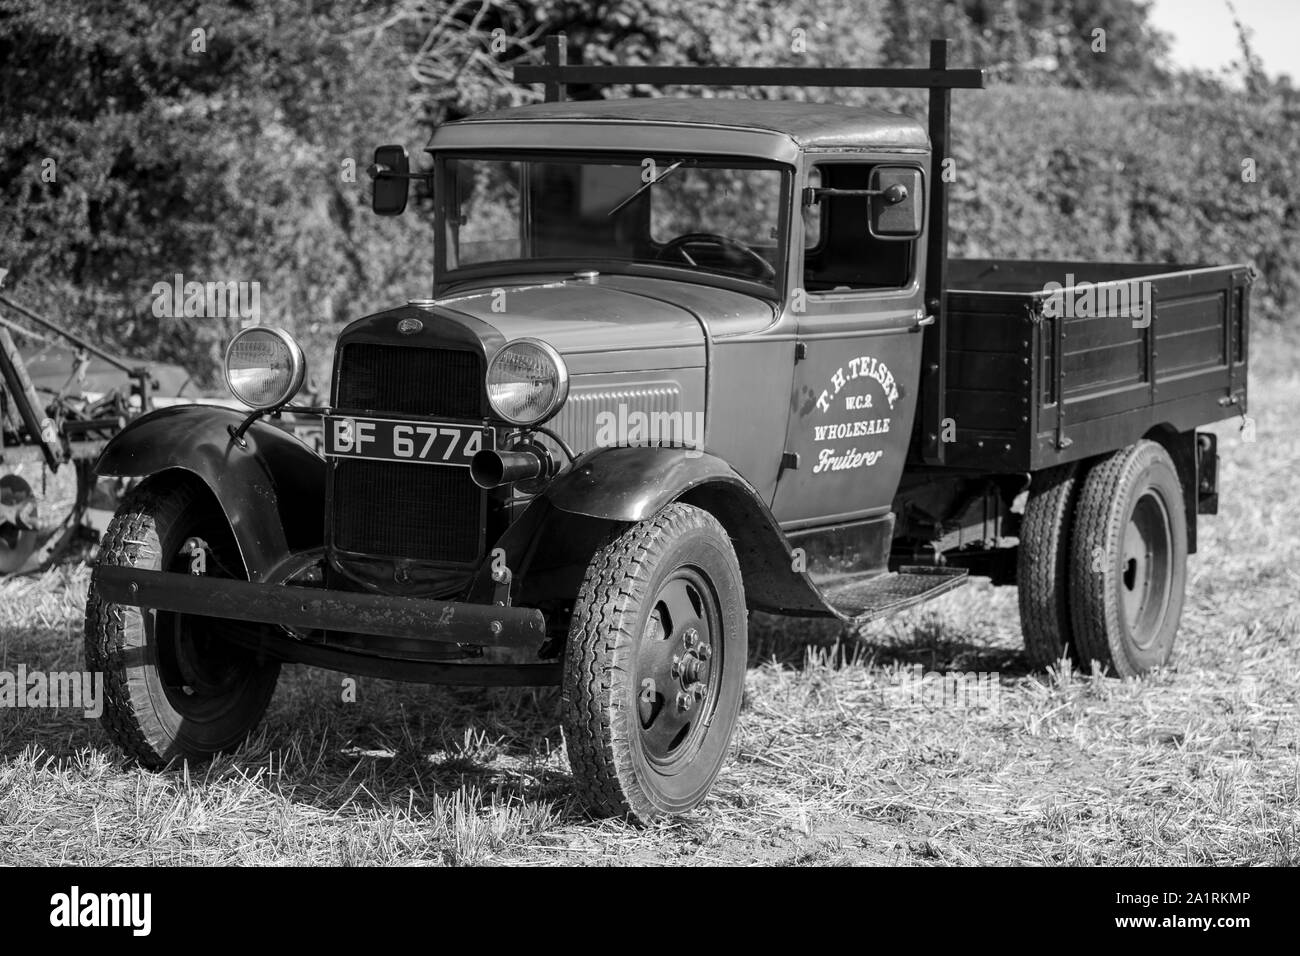 Vintage Ford Truck, 1930, BF 6774 at the Chew Stoke Vintage Tractor and Ploughing Display 2019 Stock Photo